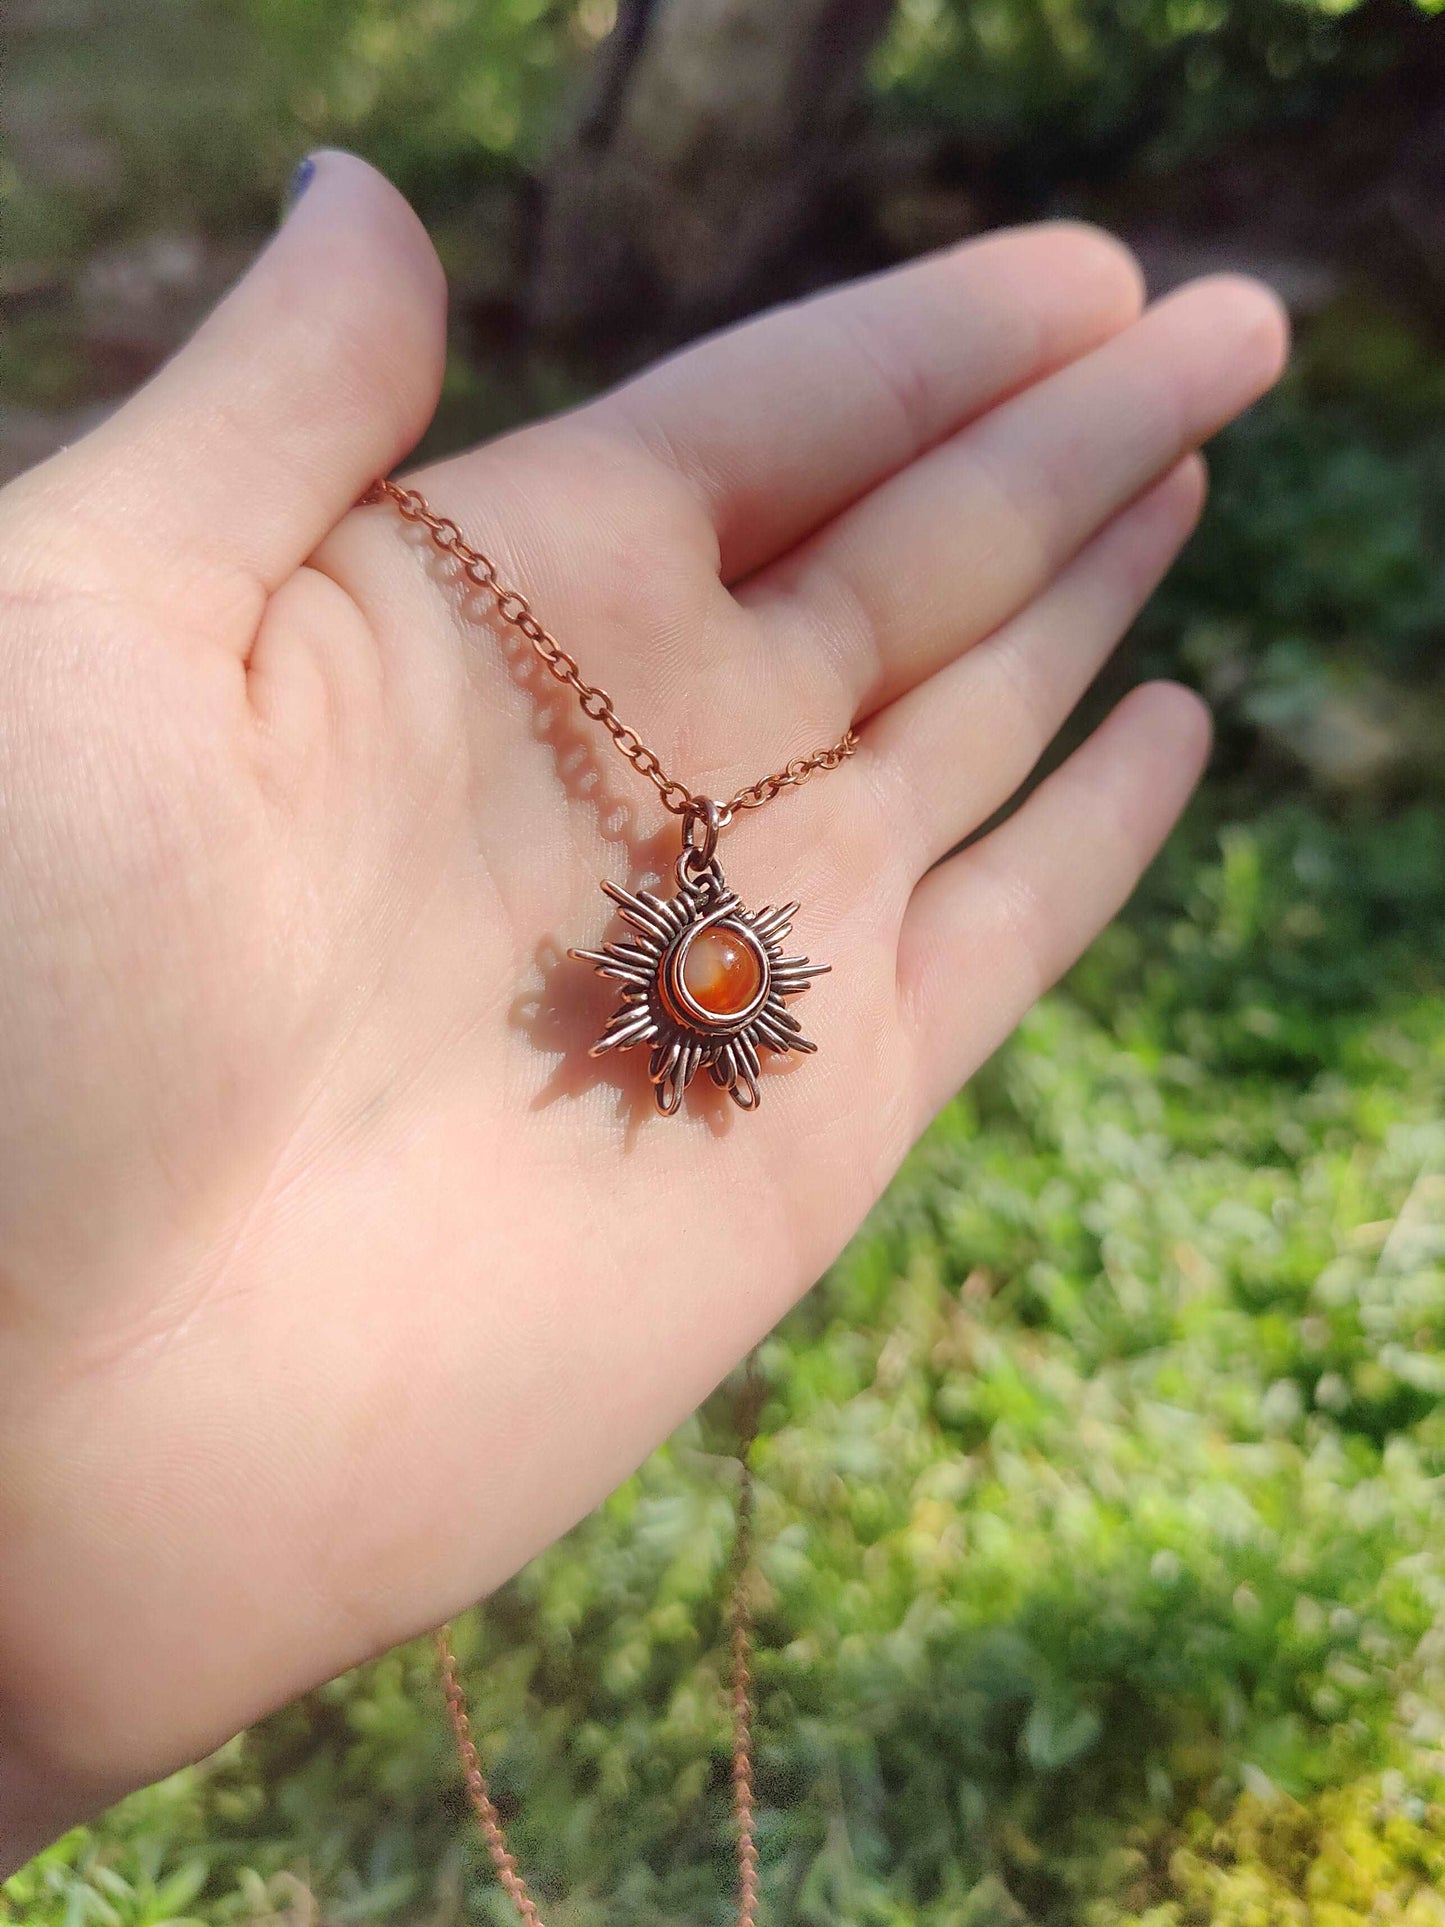 Handcrafted wire wrap carnelian sun necklace in antique copper. Versatile and perfect for any style.